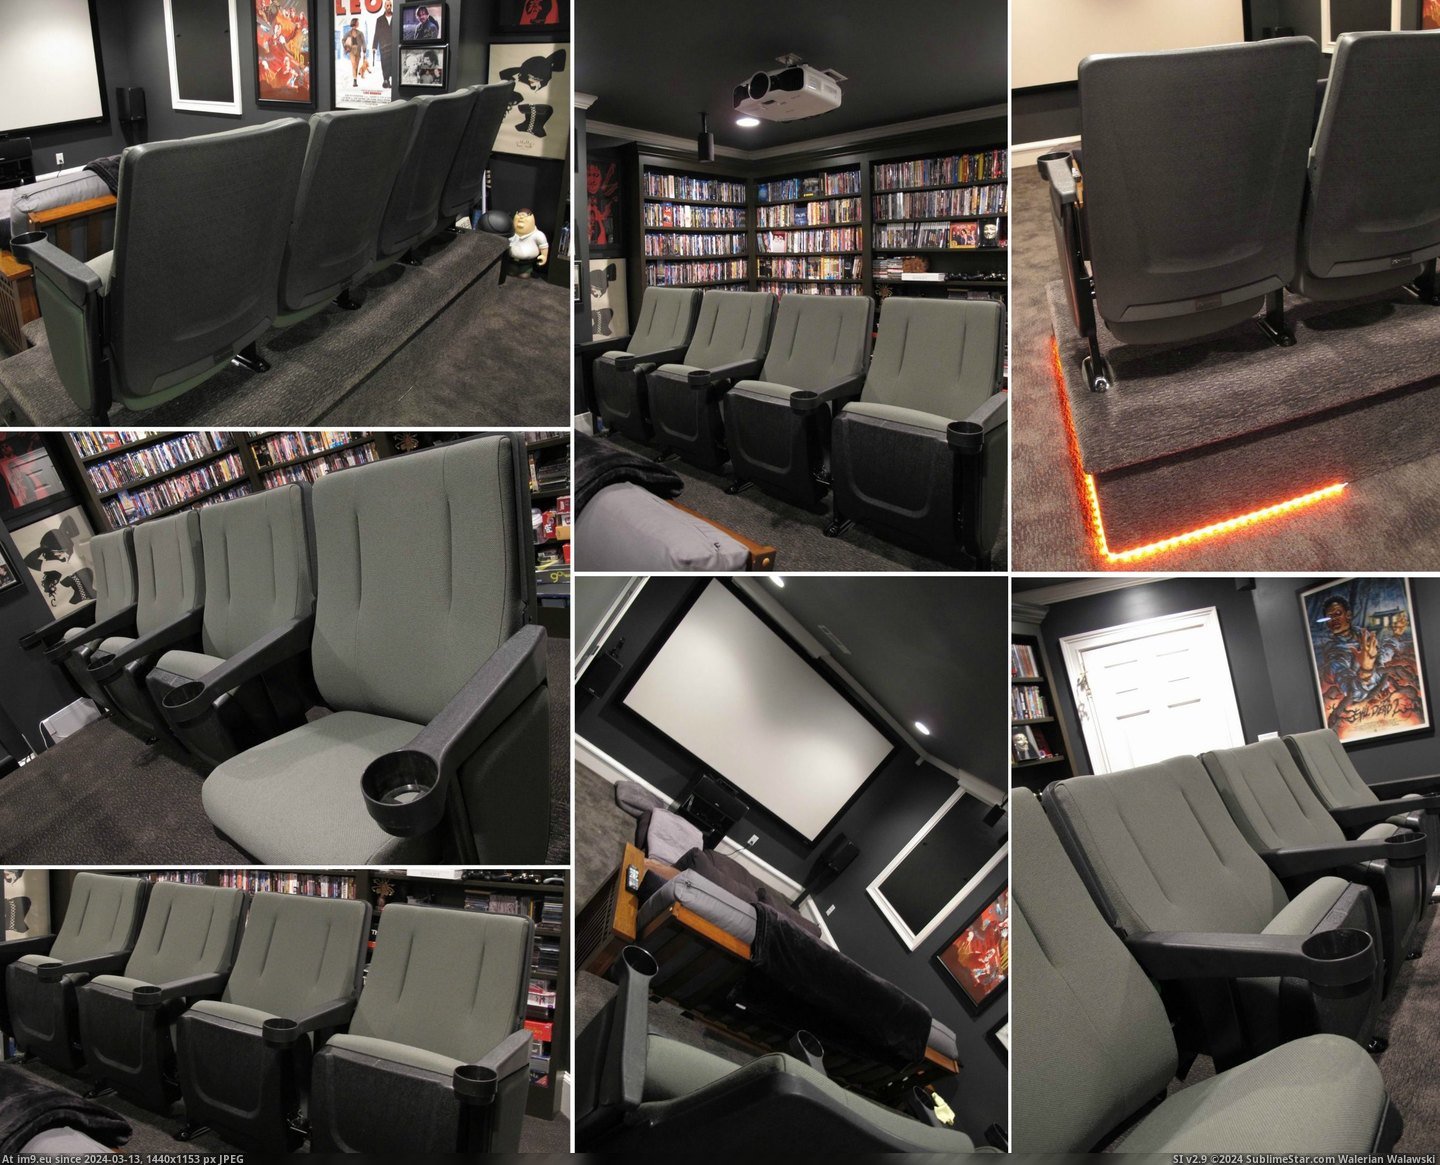 #Gaming #You #Room #Movie #Theater #Added #Seats #Wanted #Lot #See [Gaming] A lot of you wanted to see my movie-gaming room after the theater seats were added. Well...here ya go. :-) Pic. (Bild von album My r/GAMING favs))